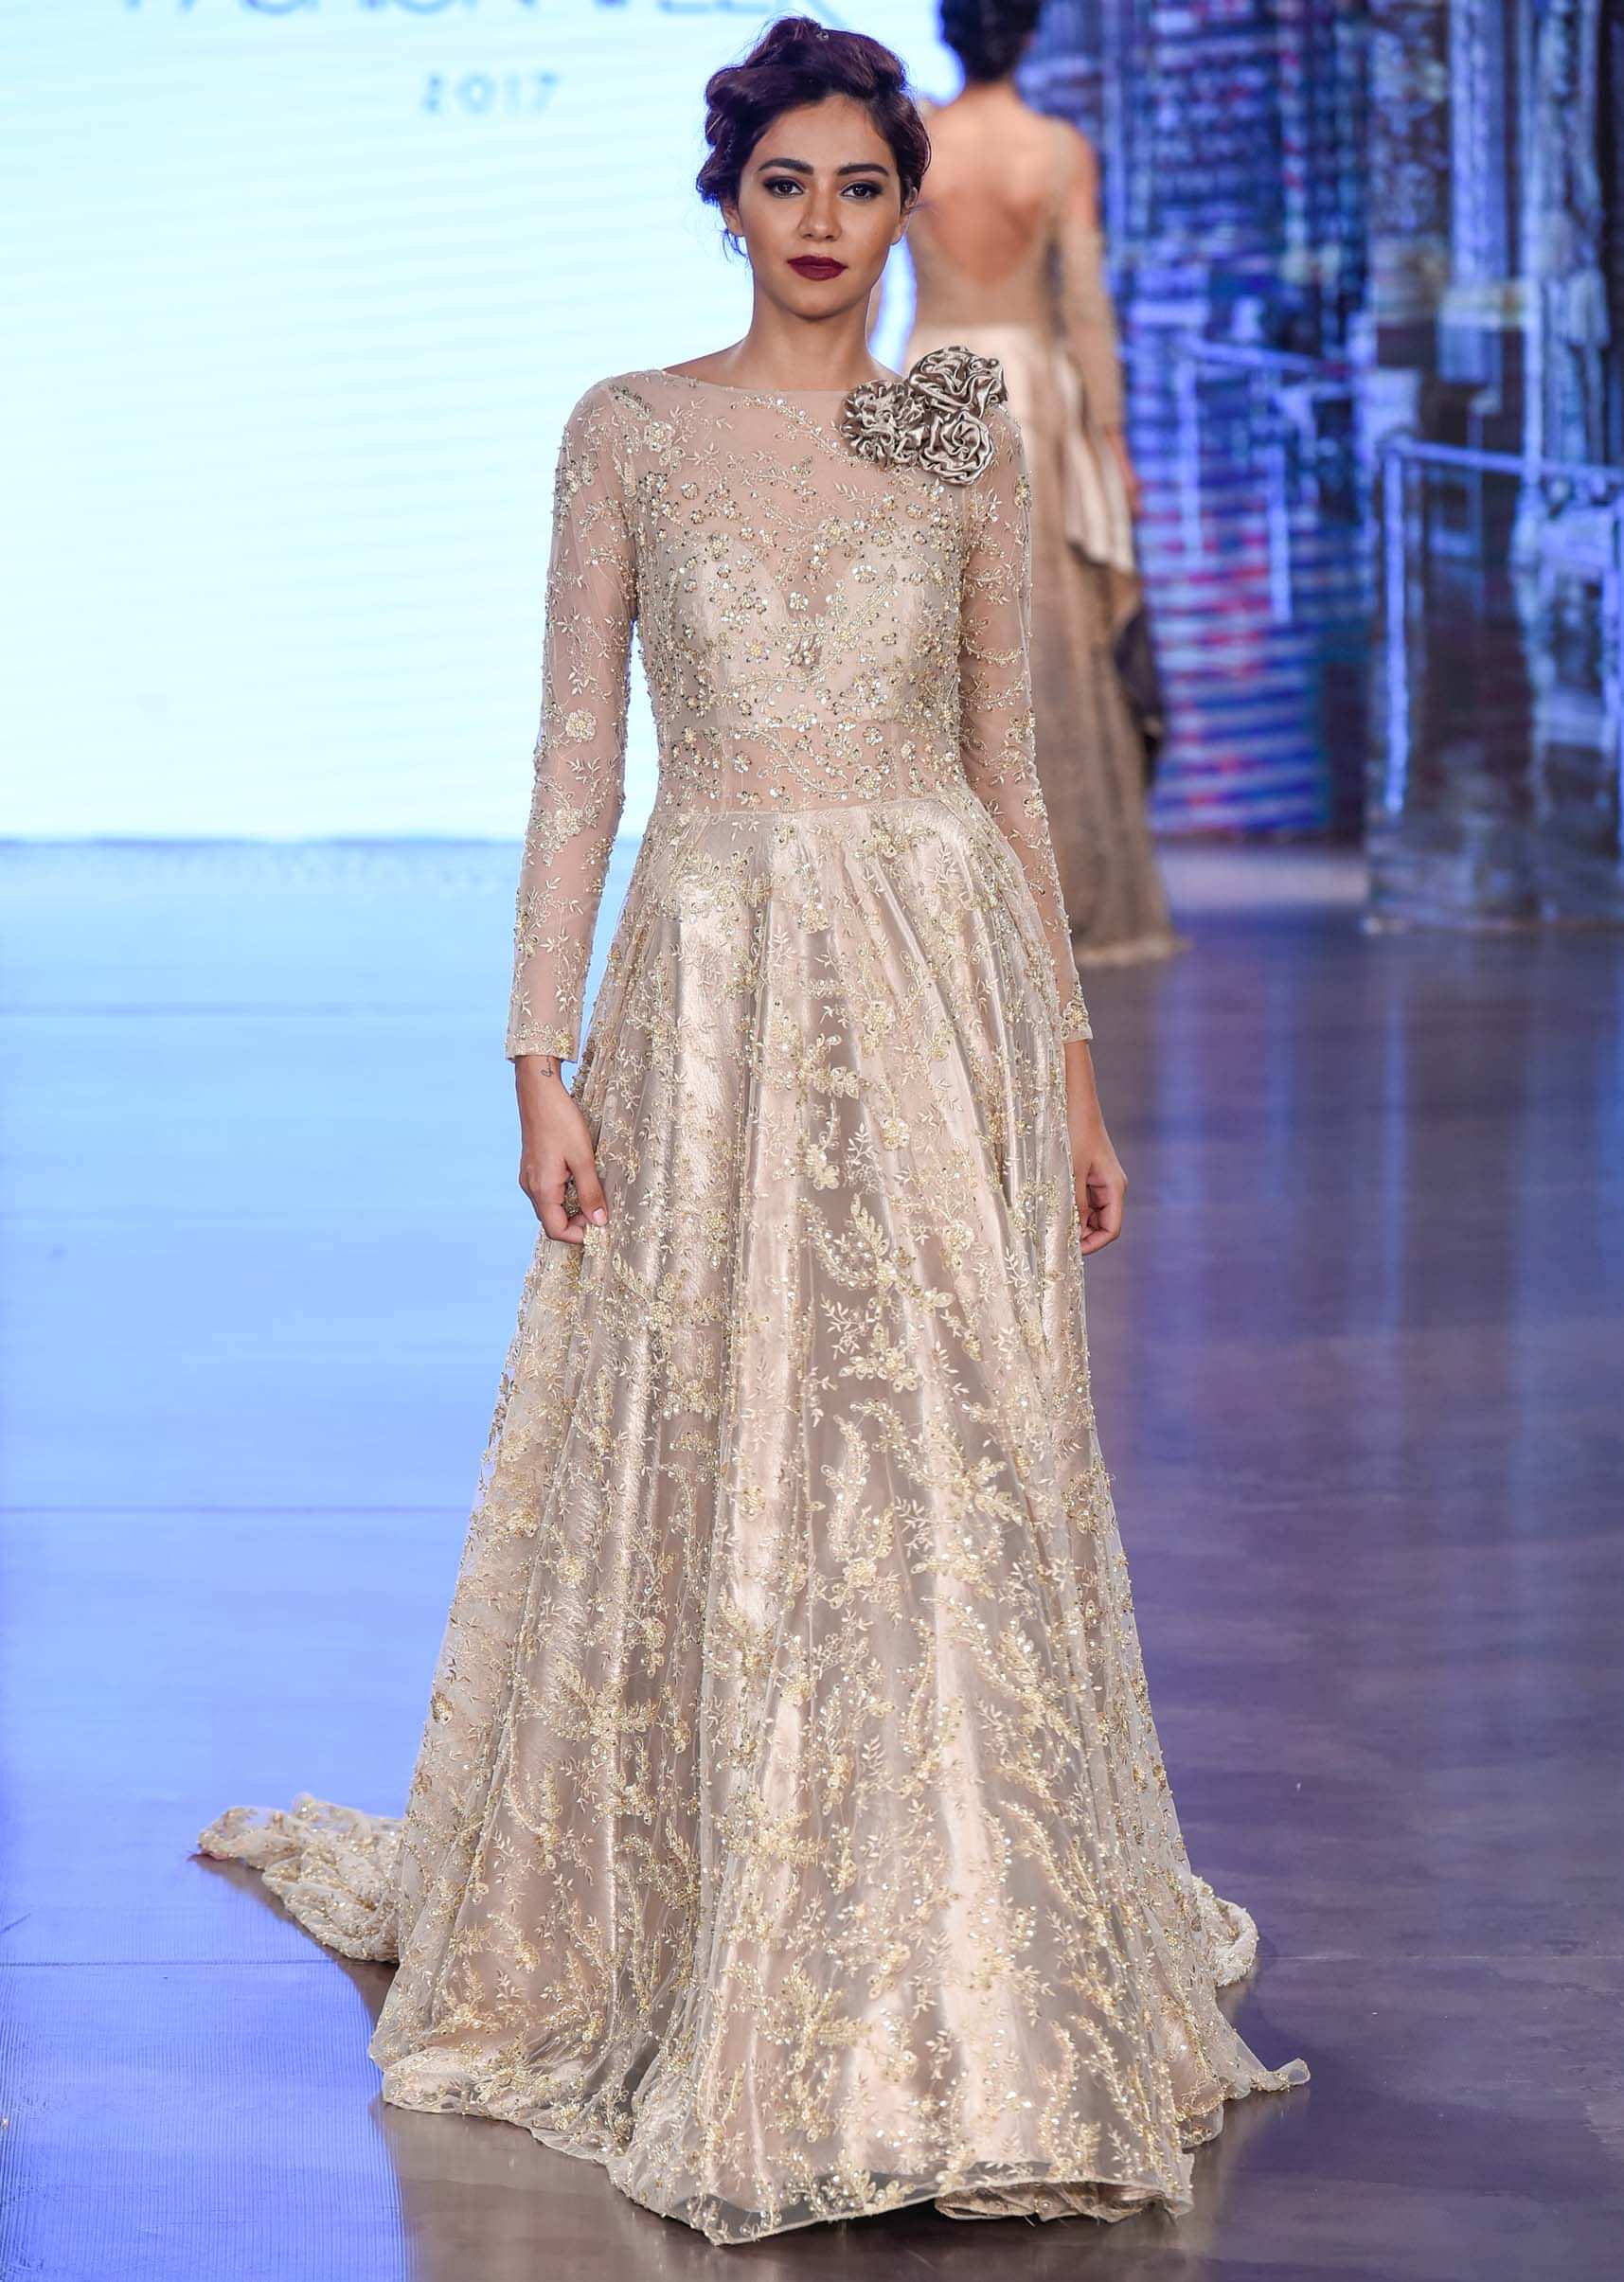 Ivory & Beige Cocktail Dress Adorned With Intricate Pearl Embroidery And 3D Flowers Online - Kalki Fashion